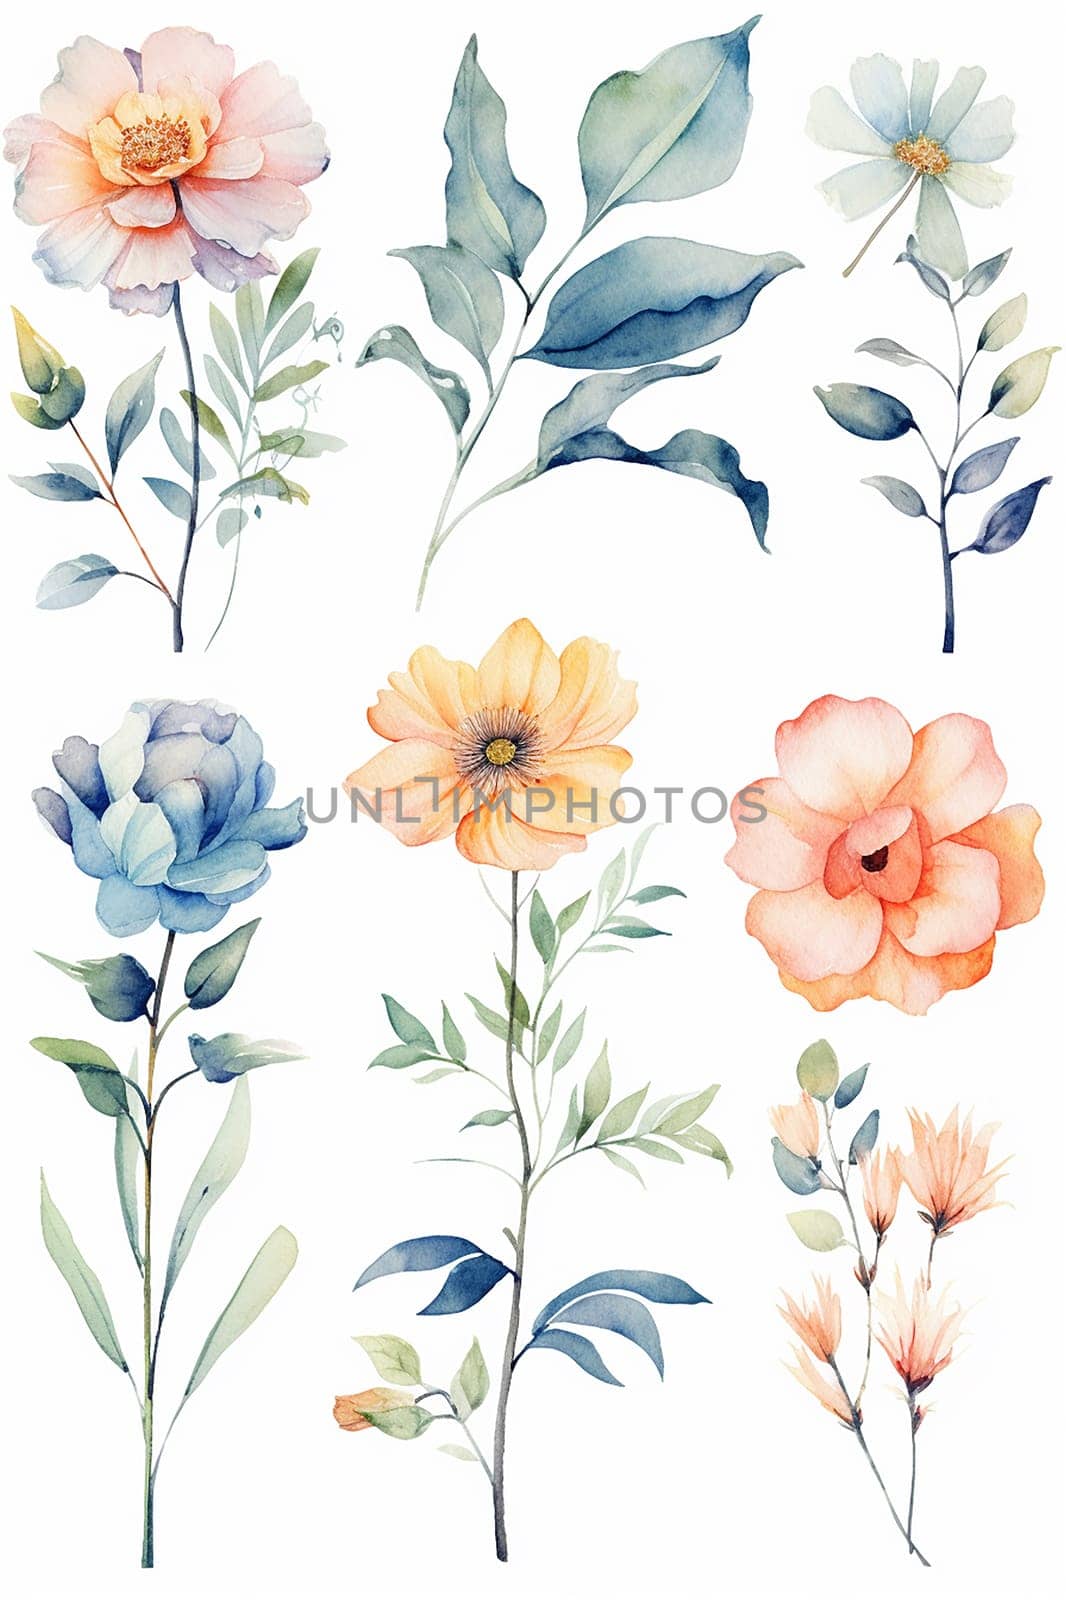 A collection of watercolor flowers and leaves in soft colors. by Hype2art